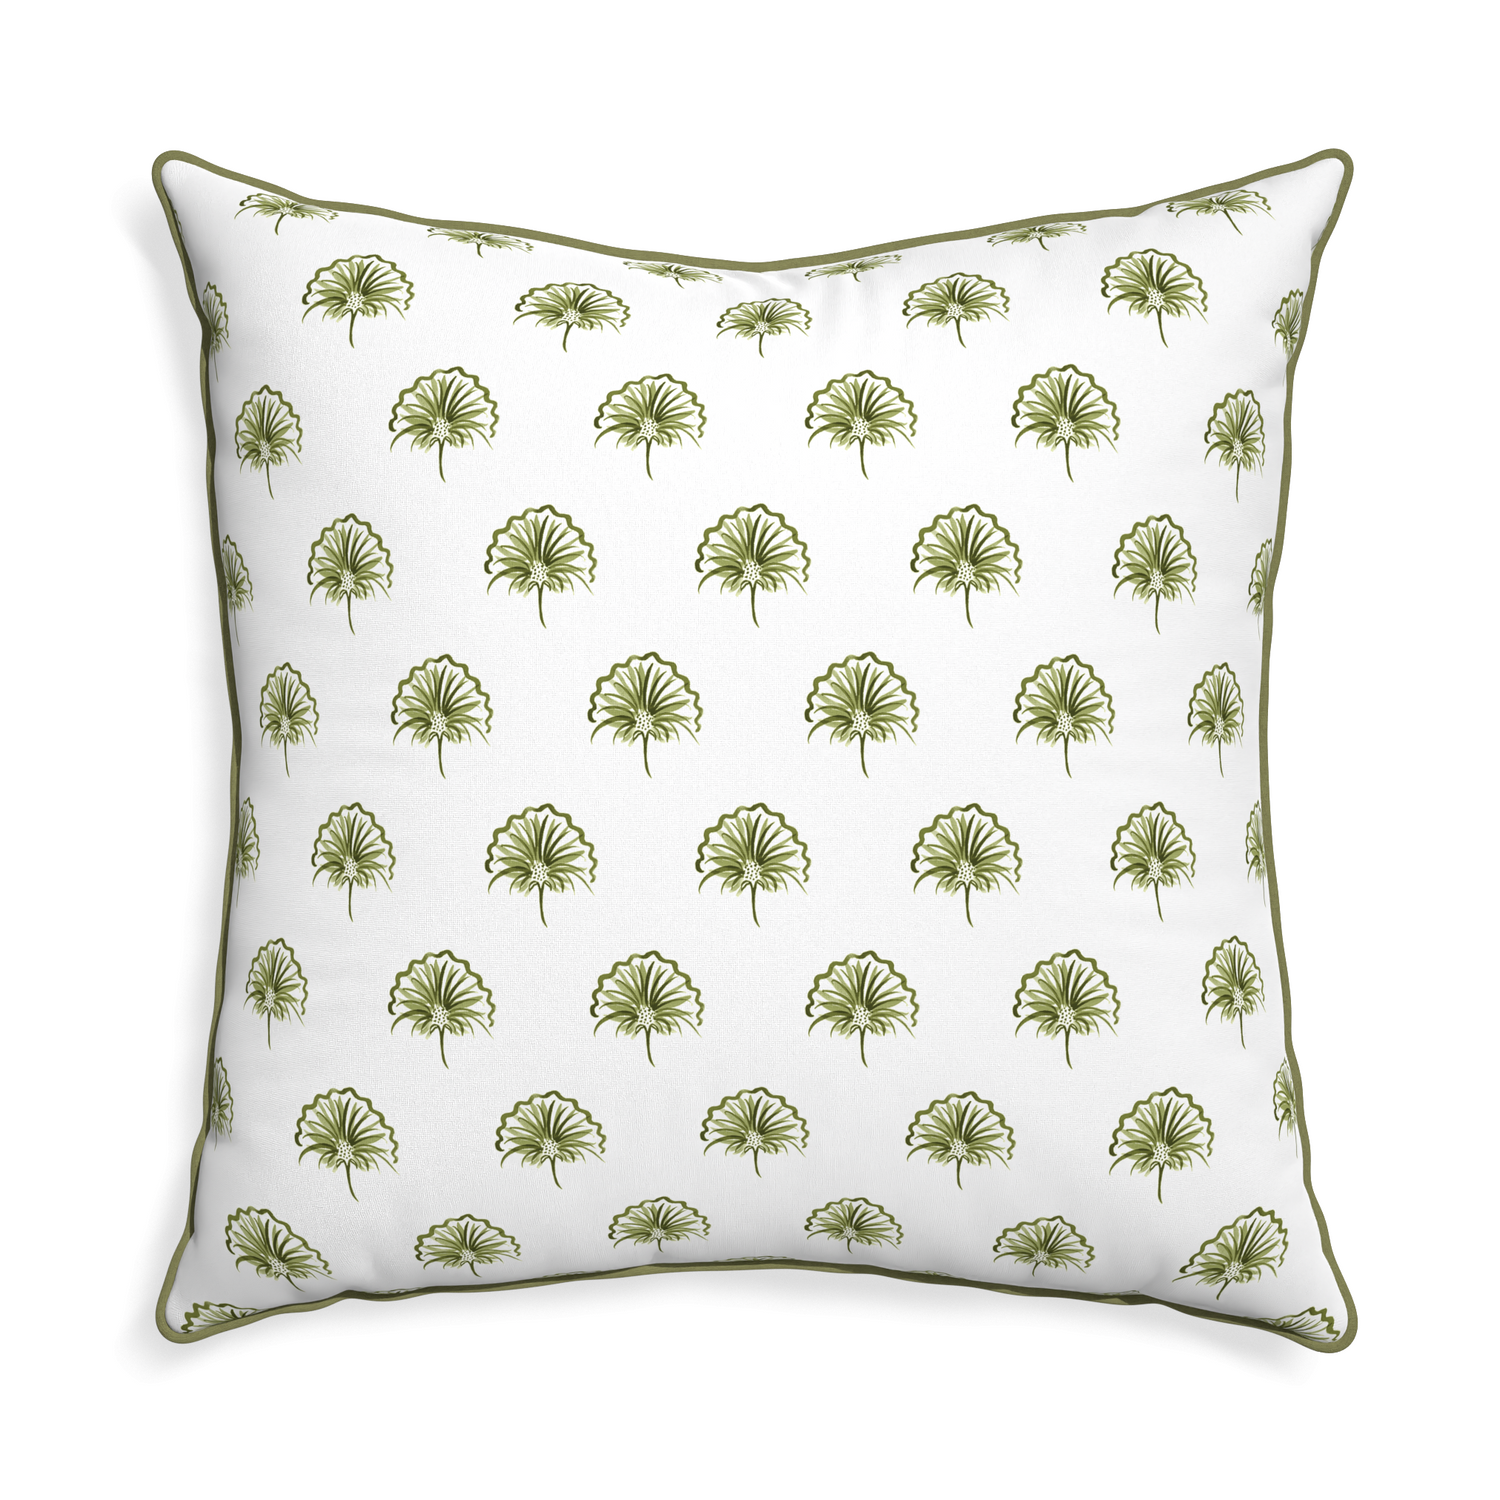 Euro-sham penelope moss custom green floralpillow with moss piping on white background